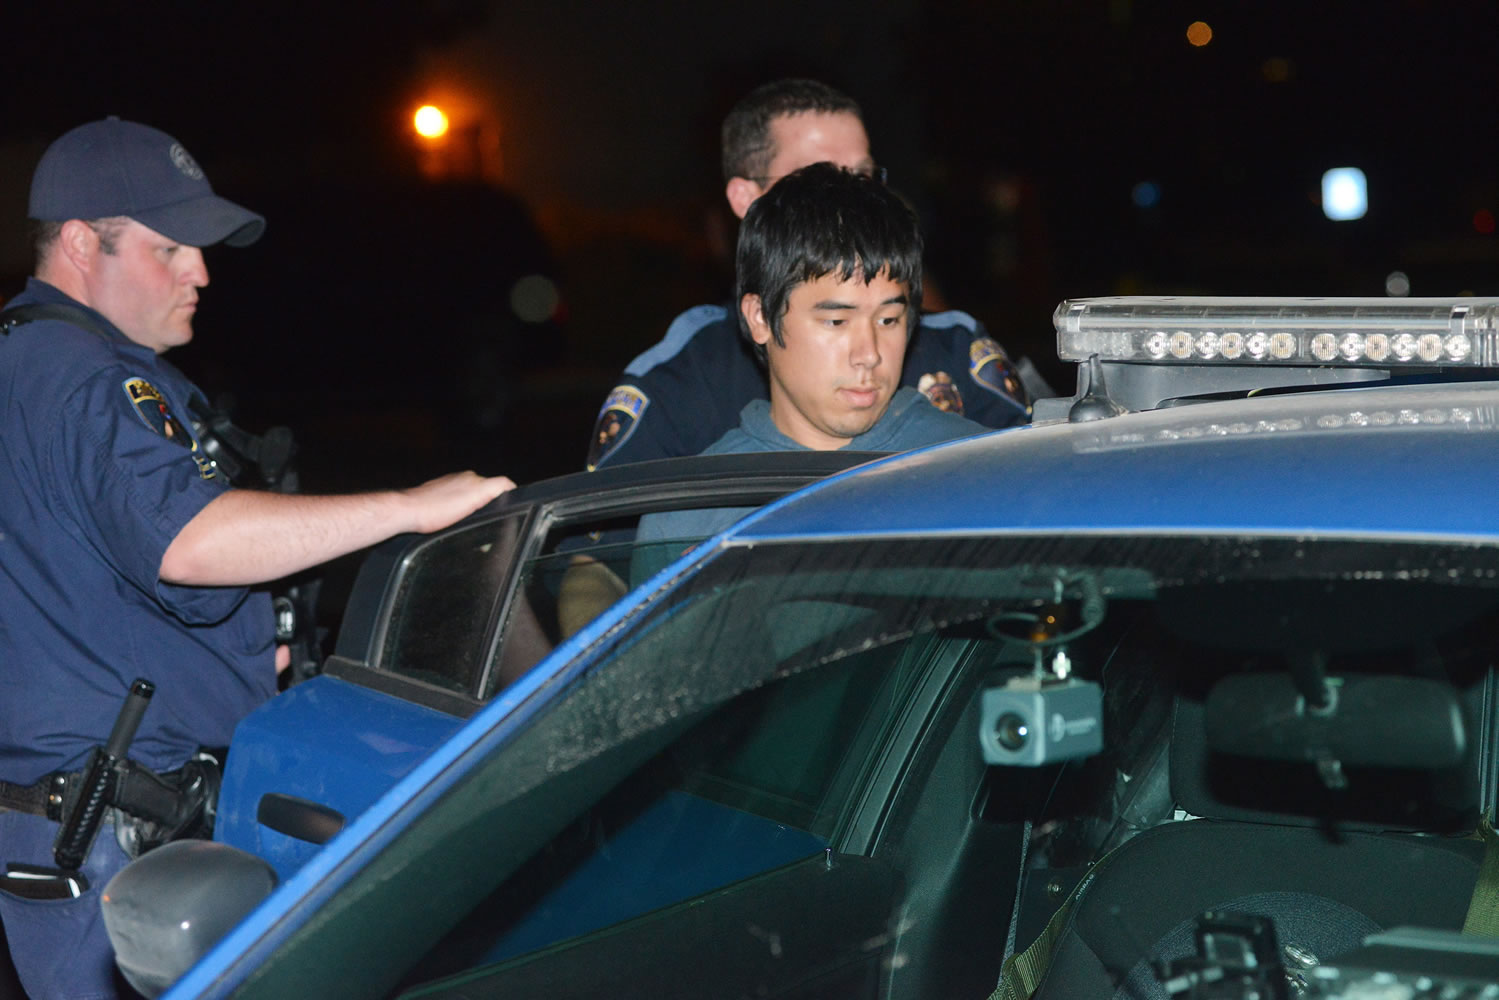 Lukah Pobzeb Chang is put into a patrol car by Pendleton Police on Aug. 28, 2013.